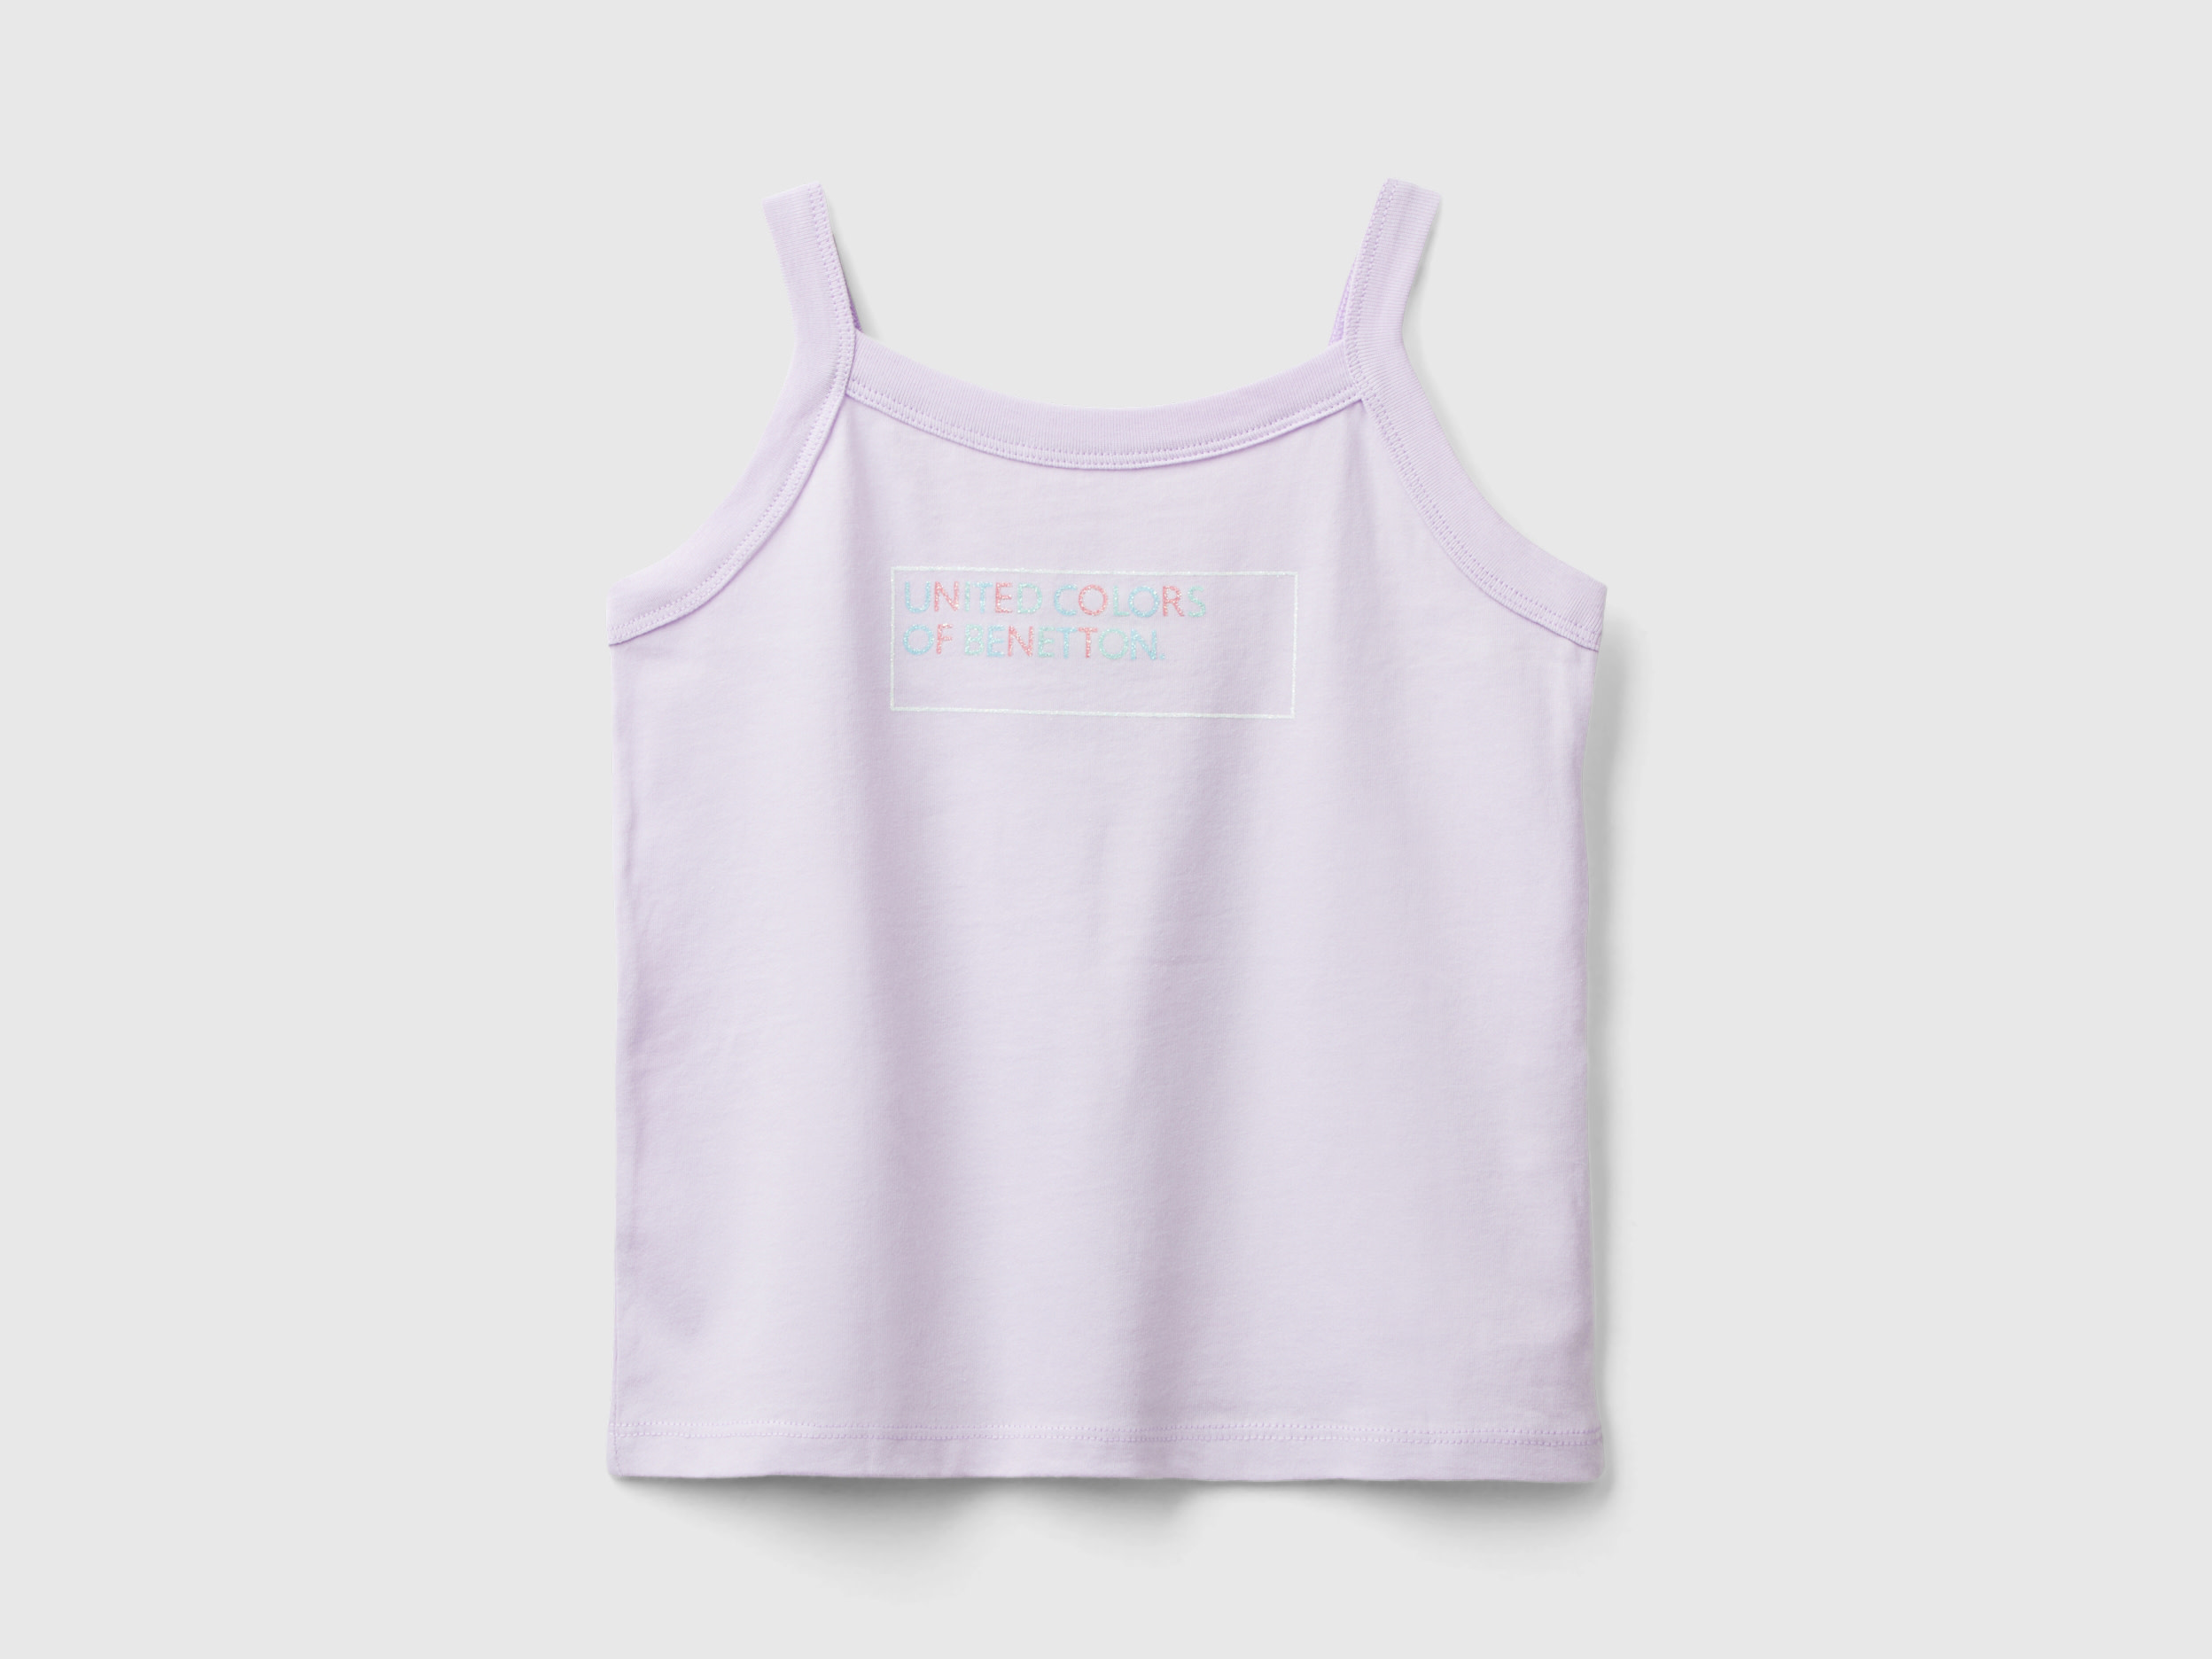 Image of Benetton, Tank Top With Glittery Logo Print, size M, Lilac, Kids